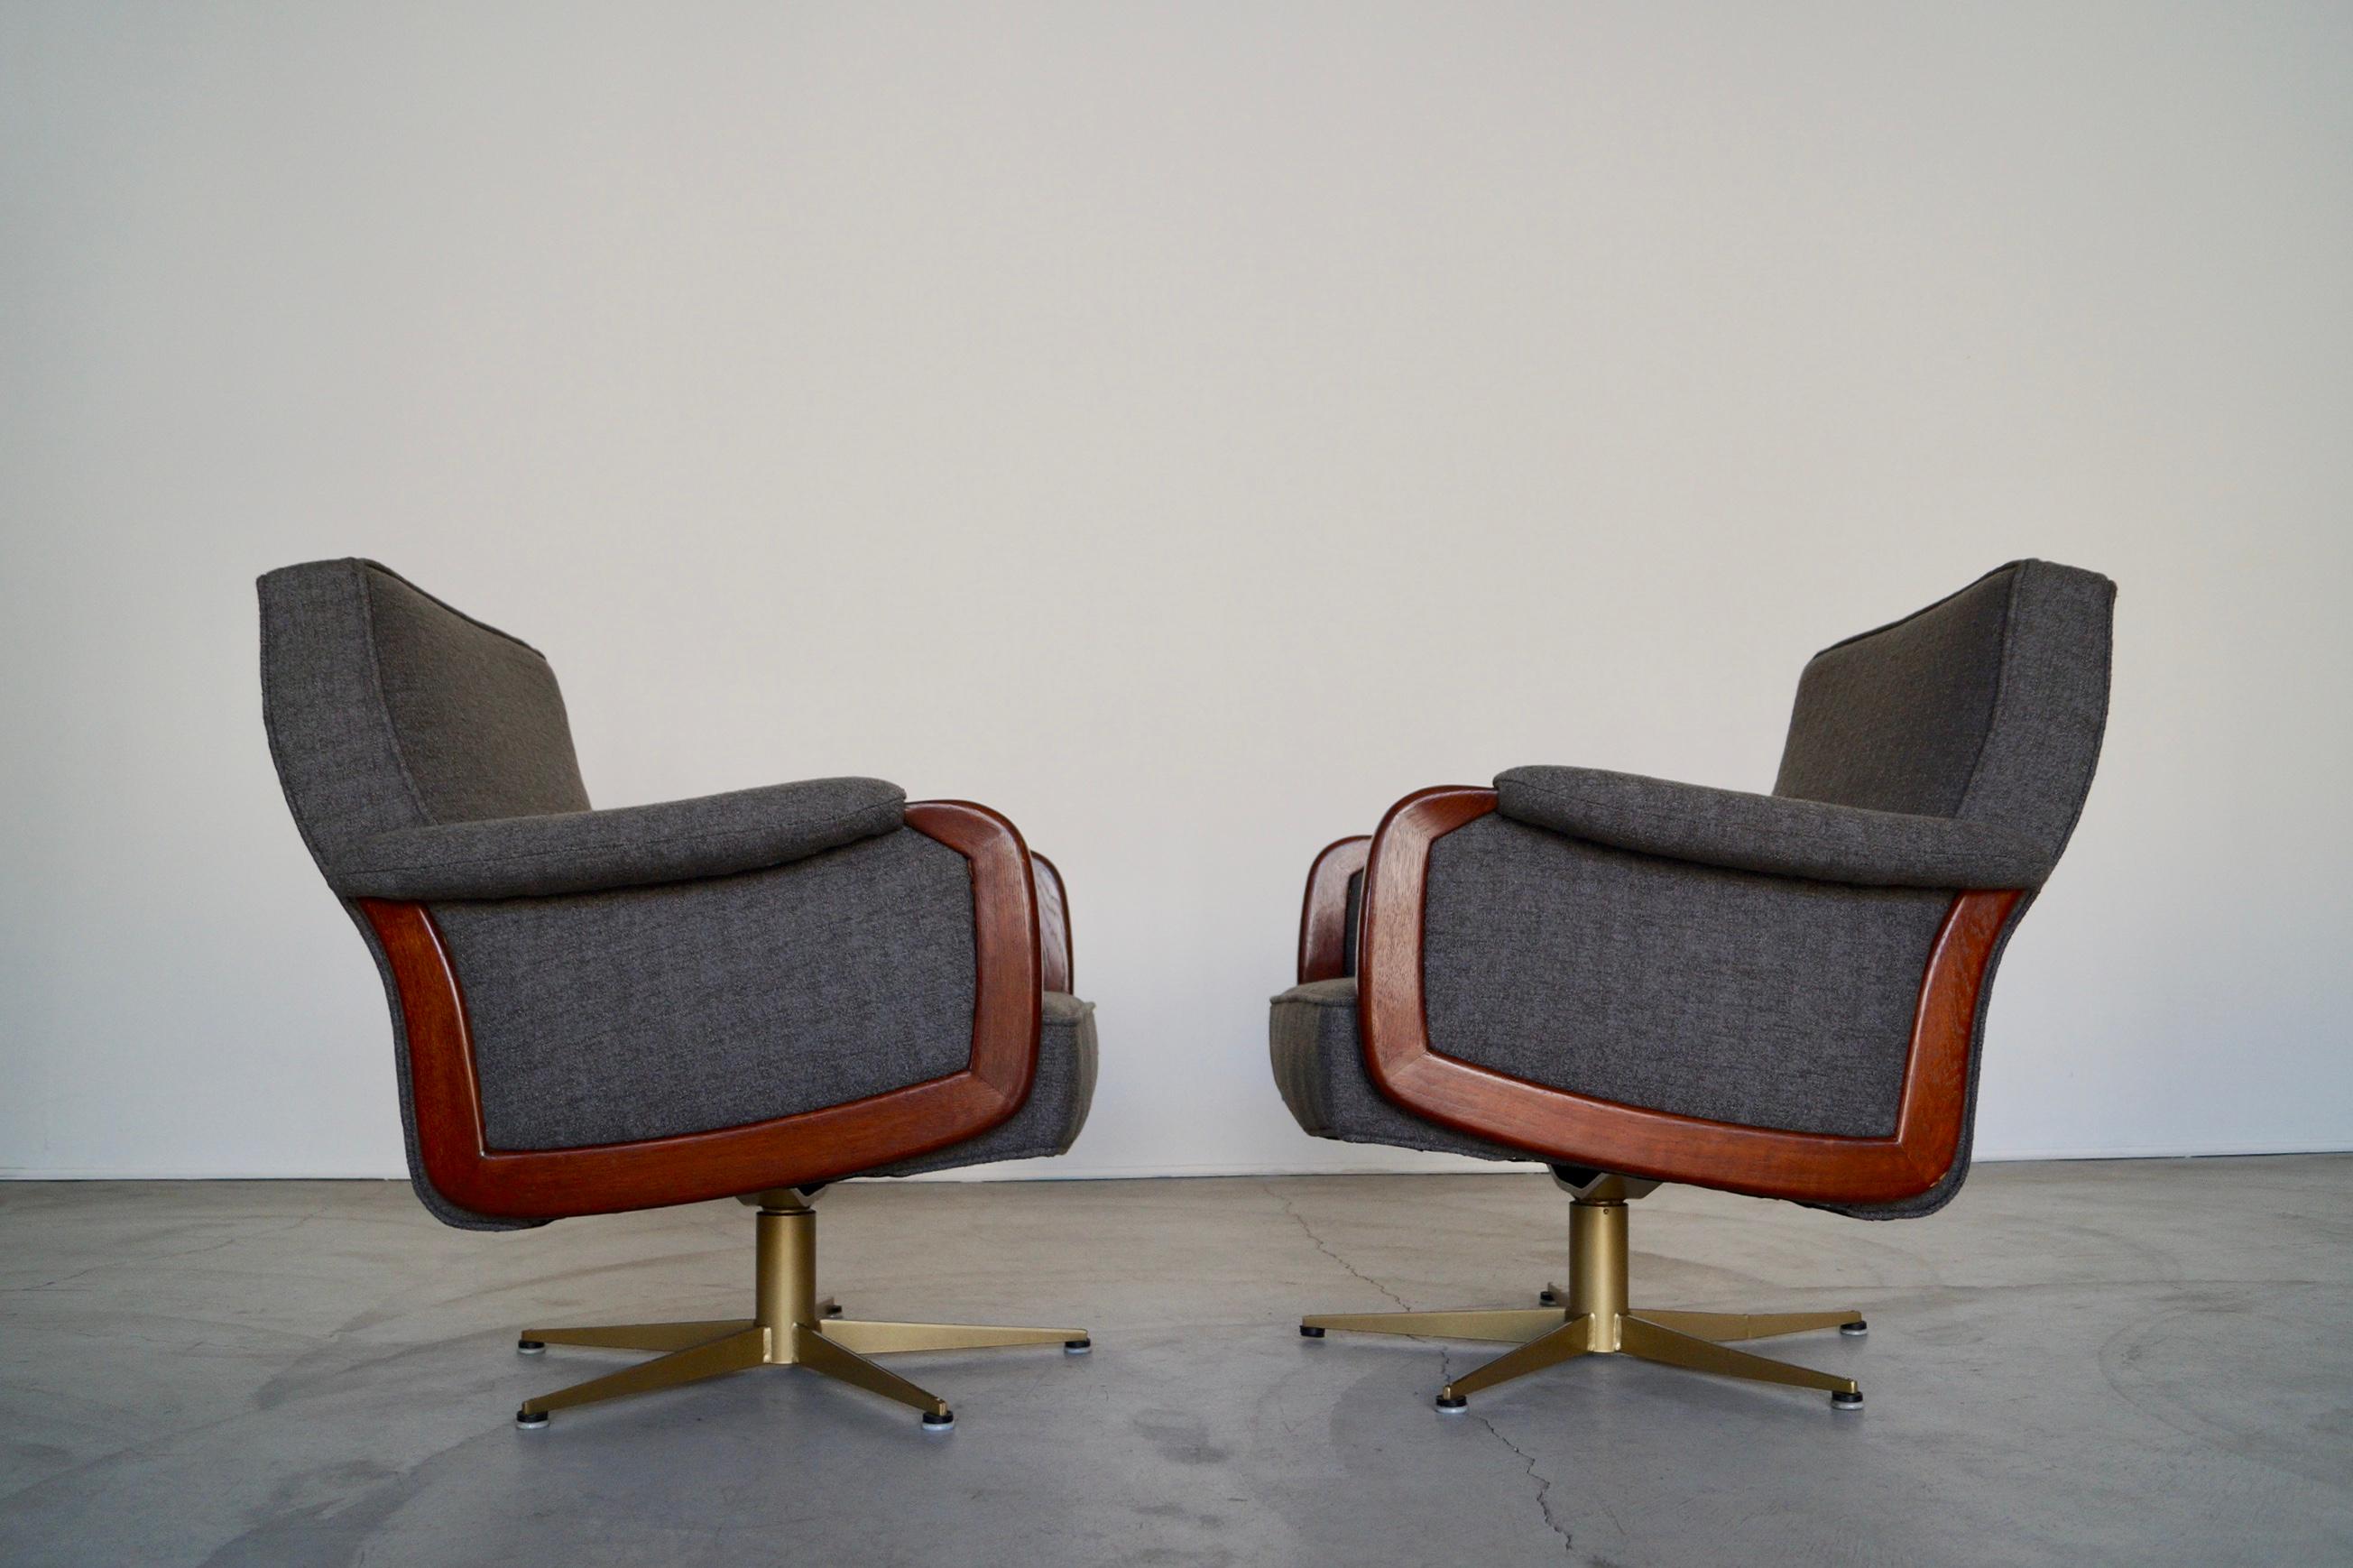 1970's Mid-Century Modern Swivel Lounge Chairs - a Pair For Sale 4